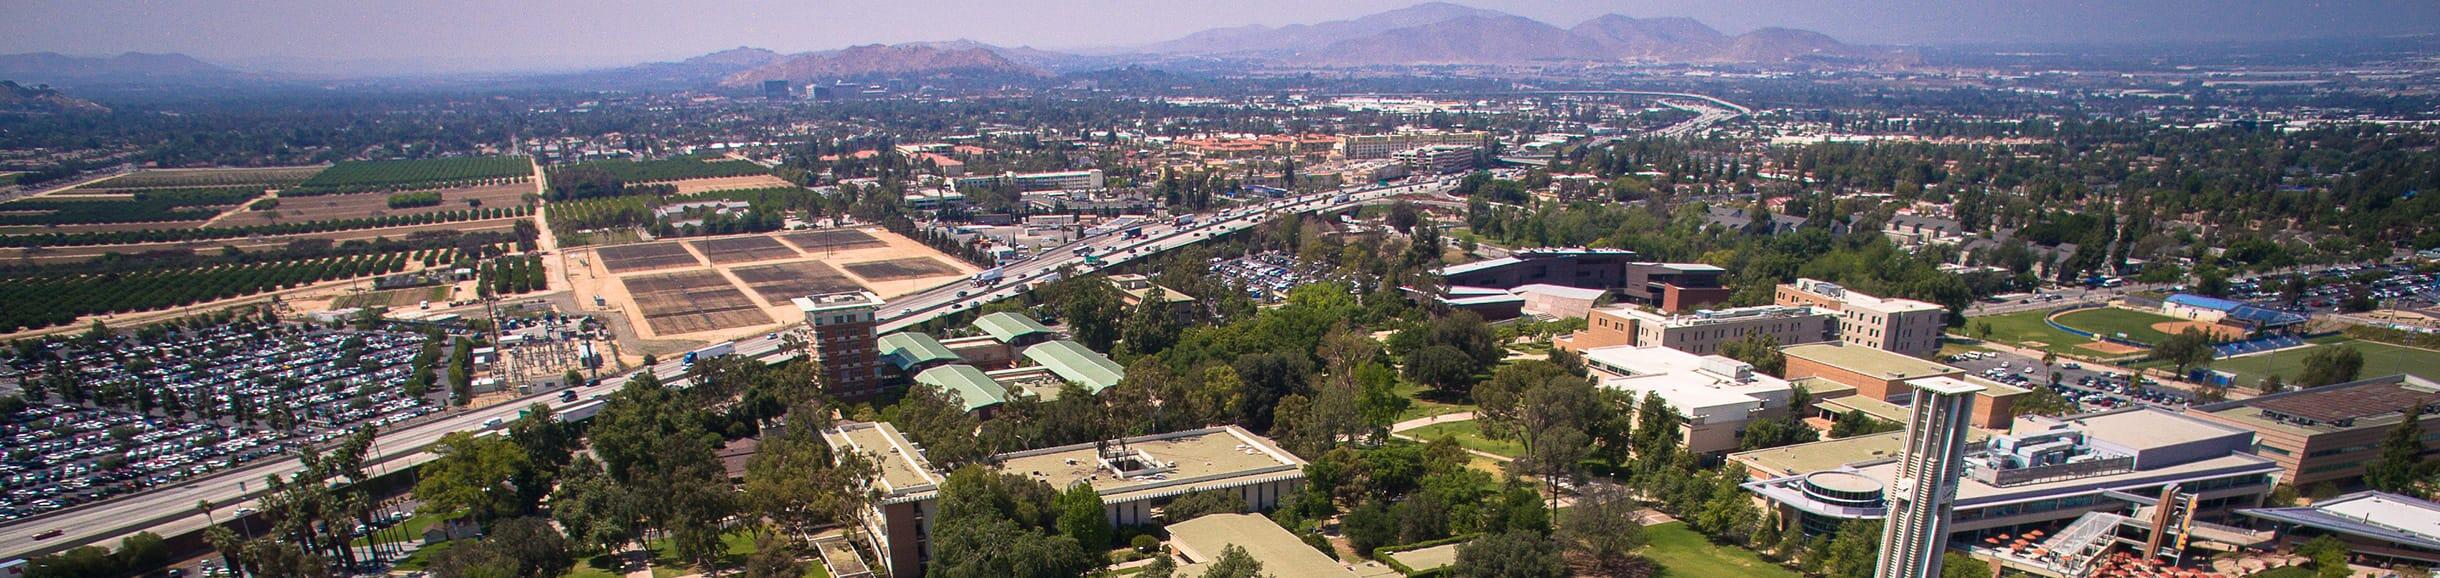 Aerial view of UC Riverside campus